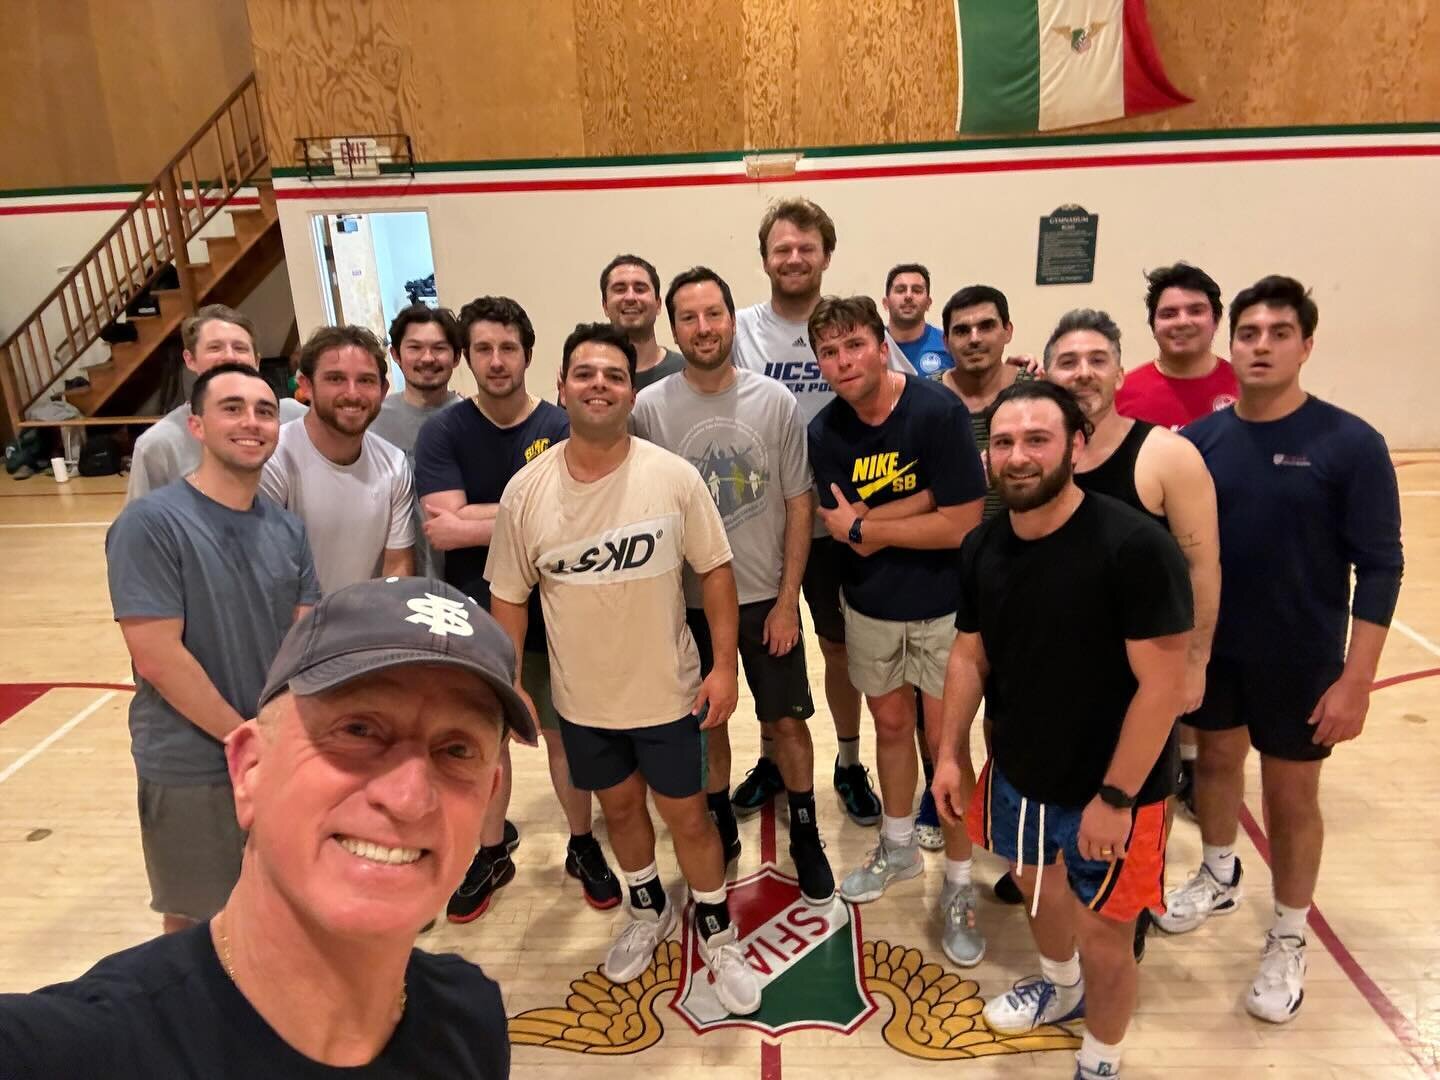 Another great turnout for Monday night basketball.  6:30. Open to all members. 📸 @frankcastaldini